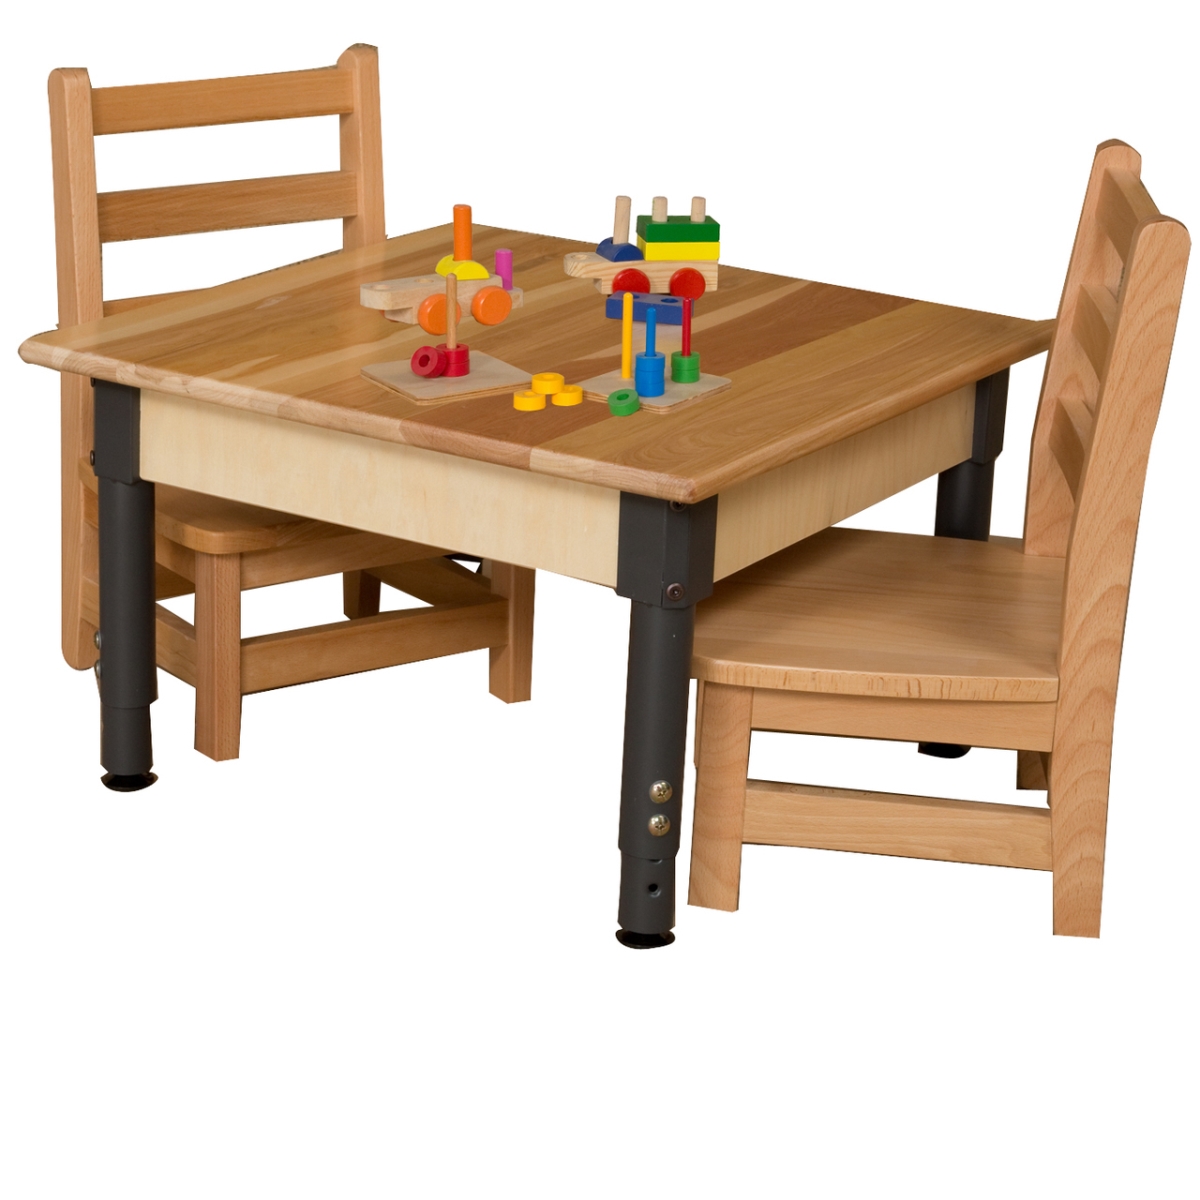 824a1217 24 In. Square Hardwood Table With Adjustable Legs 12 In. - 17 In.